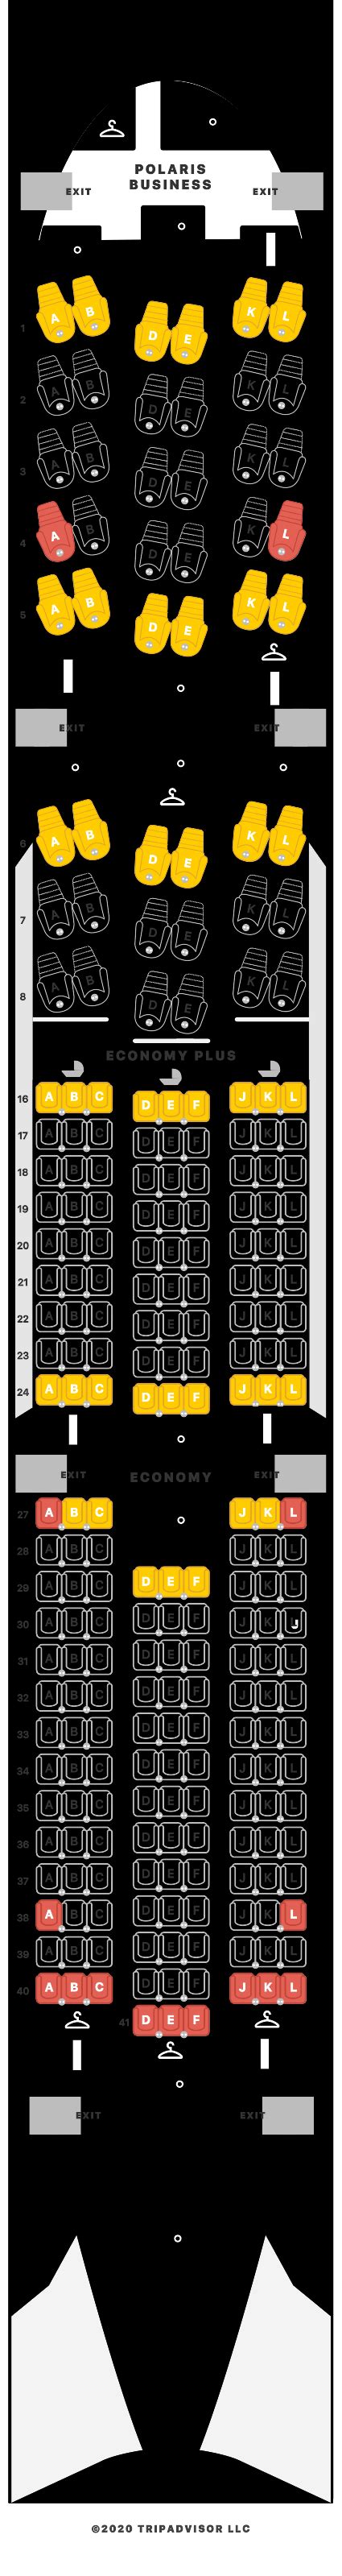 Boeing Seat Map Lufthansa Two Birds Home